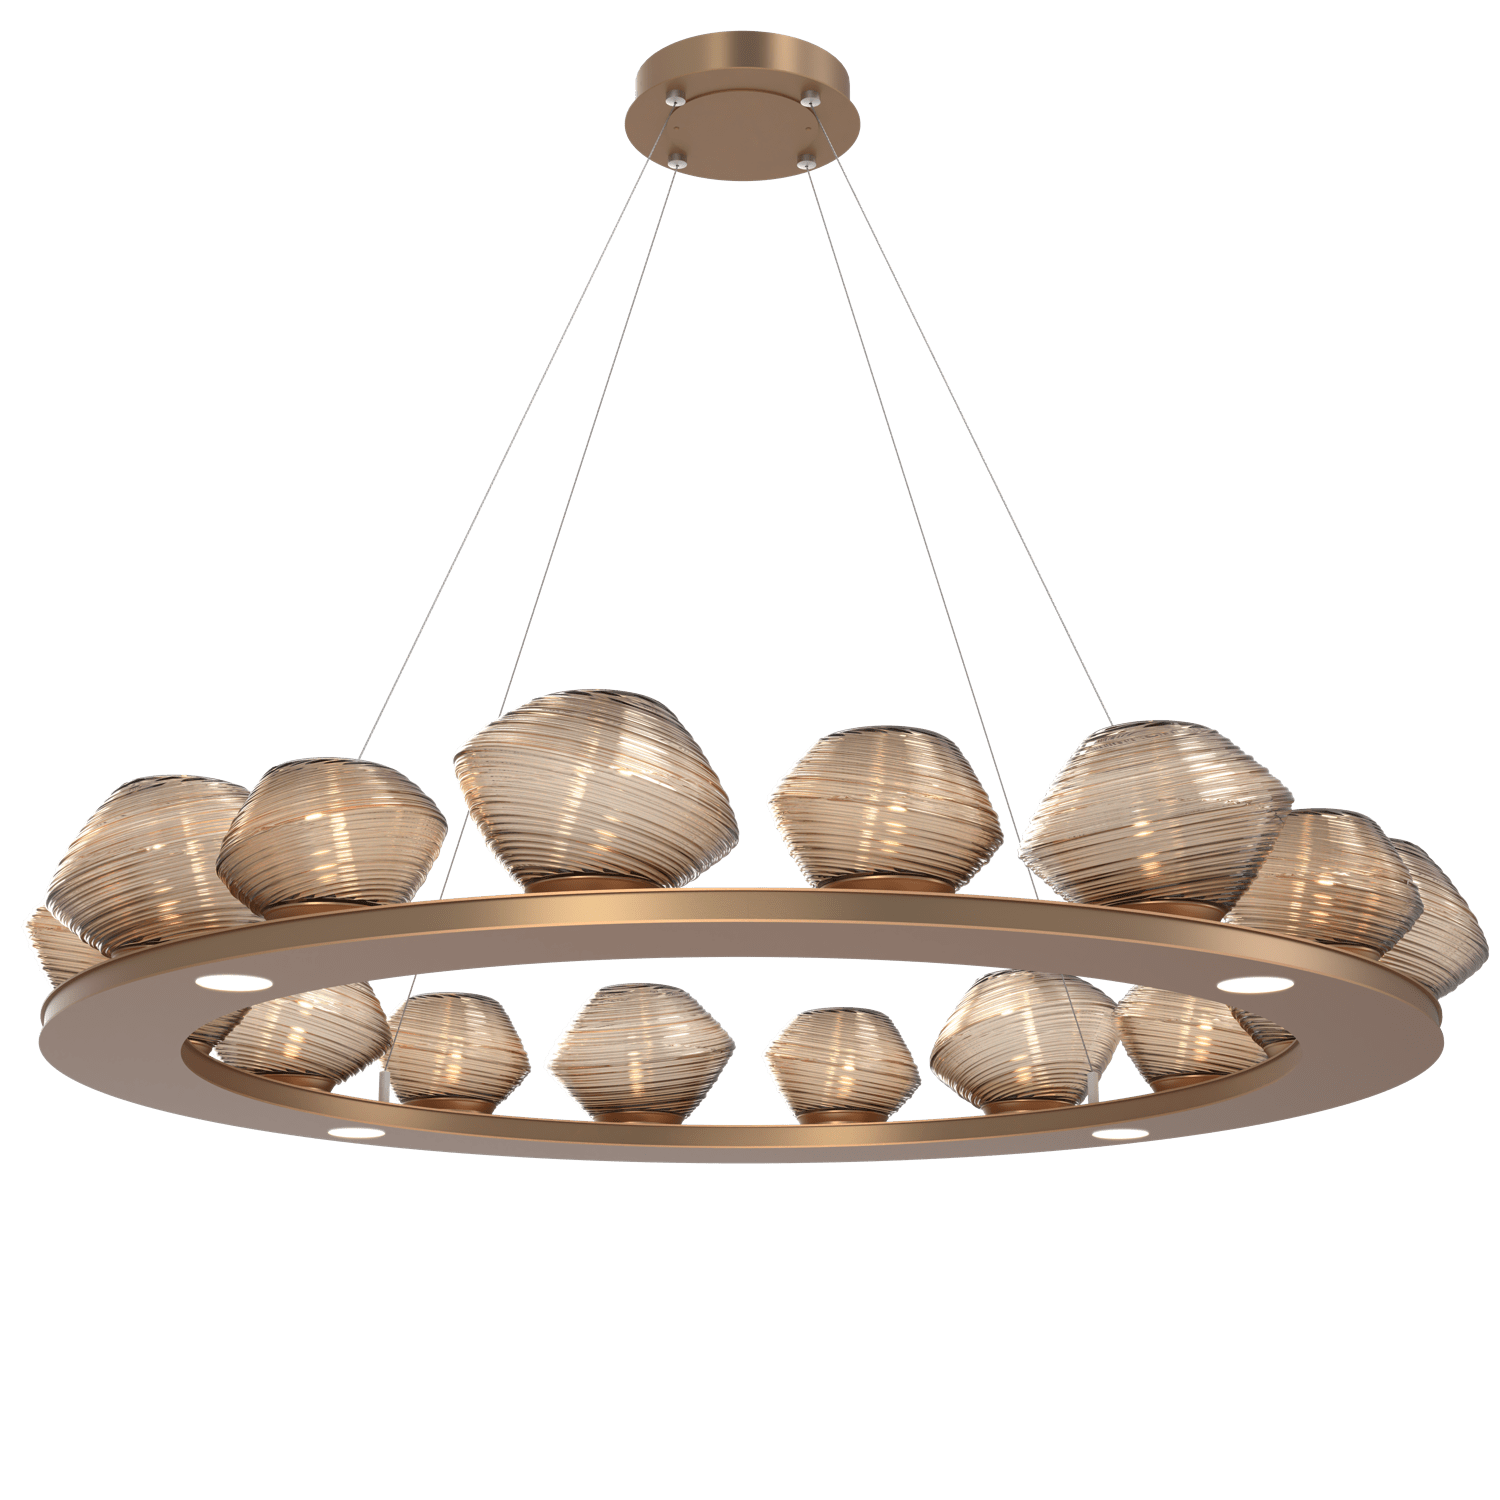 CHB0089-0D-NB-B-Hammerton-Studio-Mesa-48-inch-ring-chandelier-with-novel-brass-finish-and-bronze-blown-glass-shades-and-LED-lamping